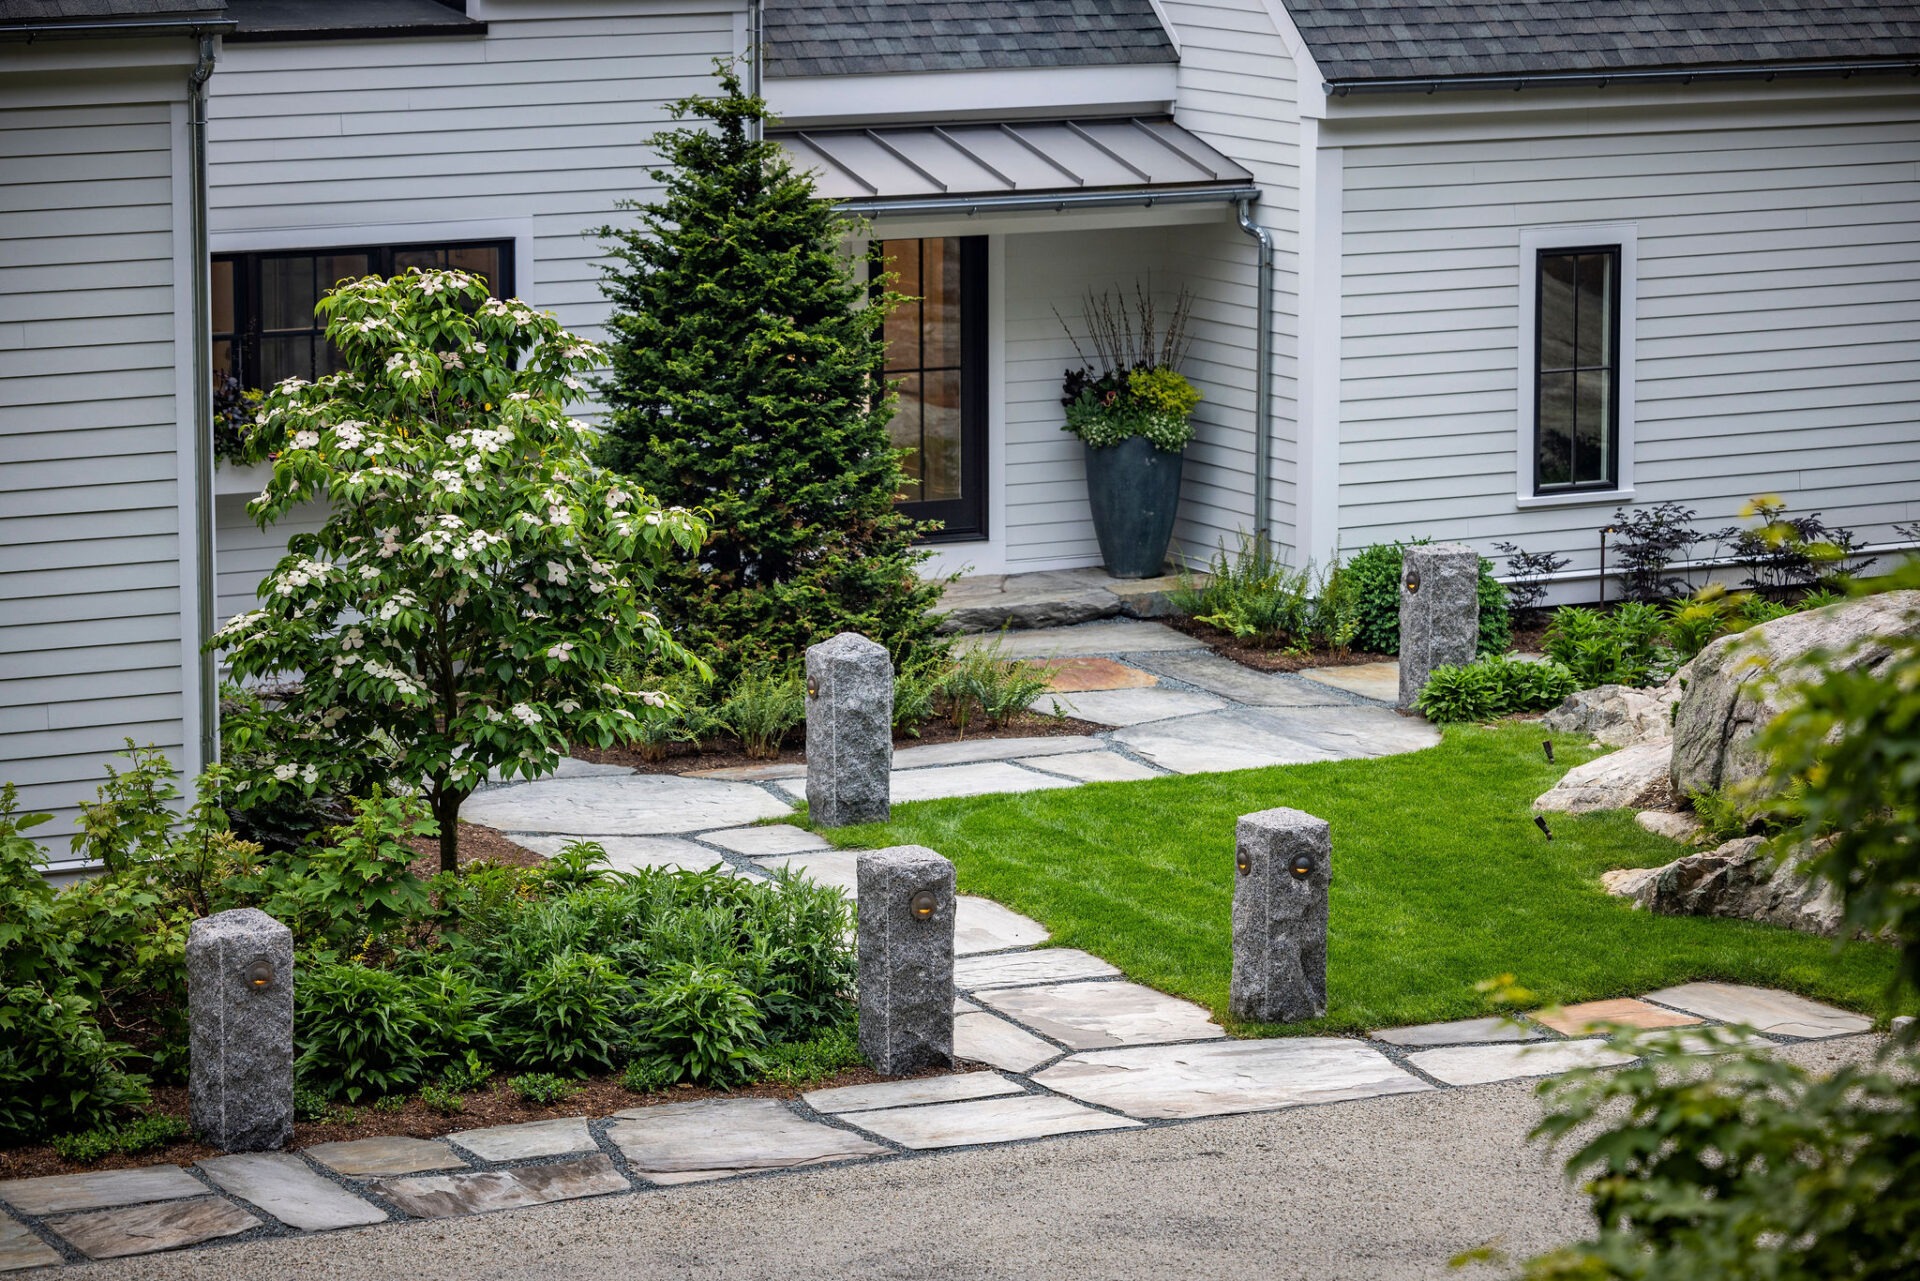 A well-manicured garden with stone pathway leading to a white house, flanked by granite posts and lush greenery. Decorative plants add to the serene landscape.